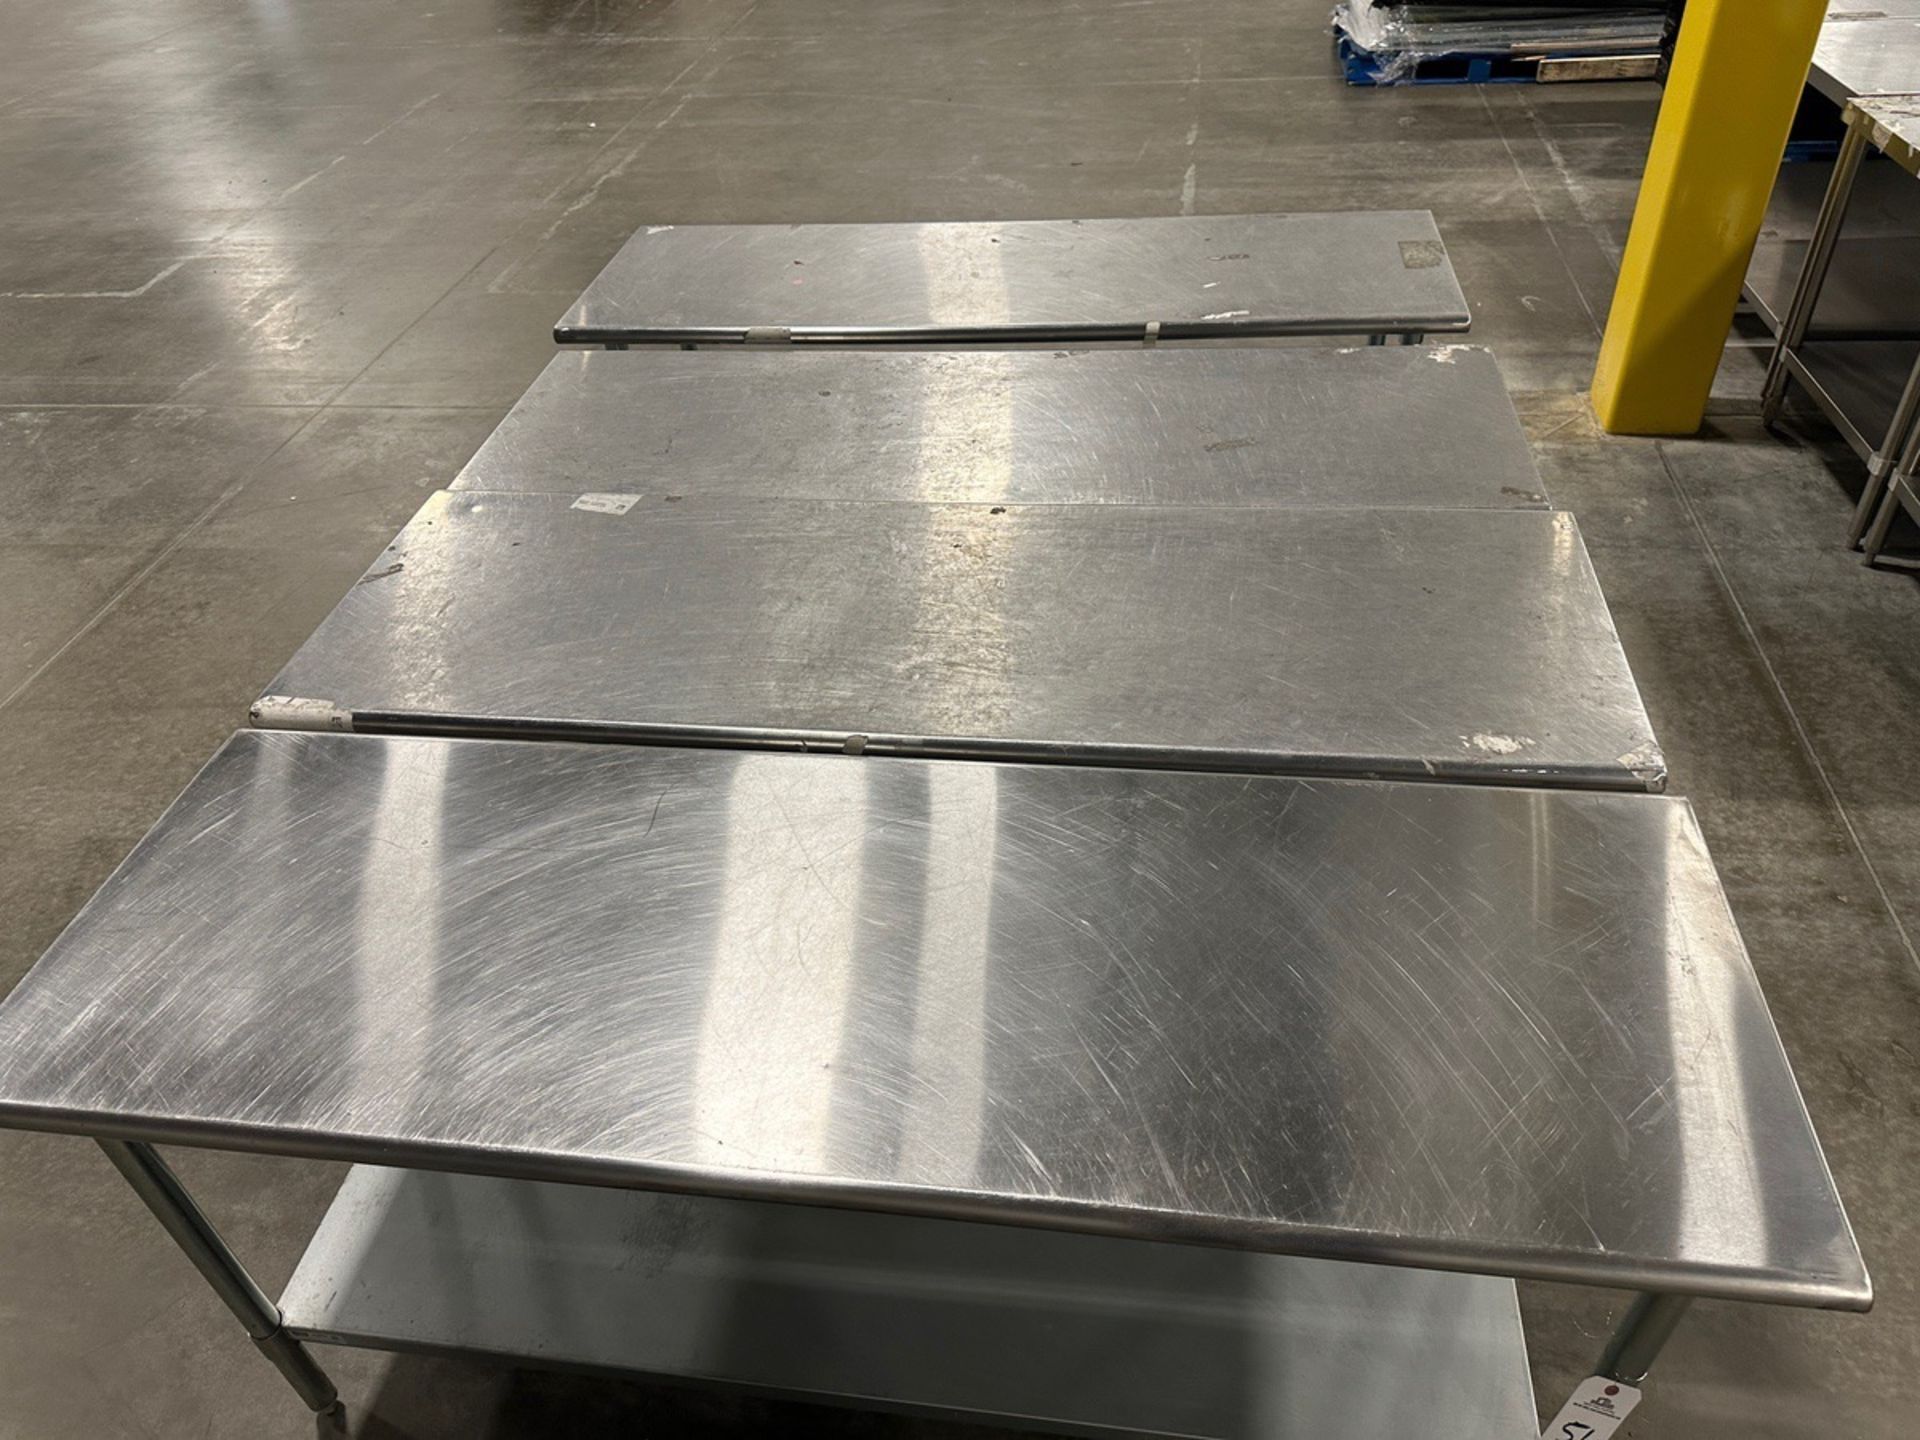 Lot of (4) Stainless Steel Tables - Approx. 2' x 6' | Rig Fee $50 - Image 2 of 2